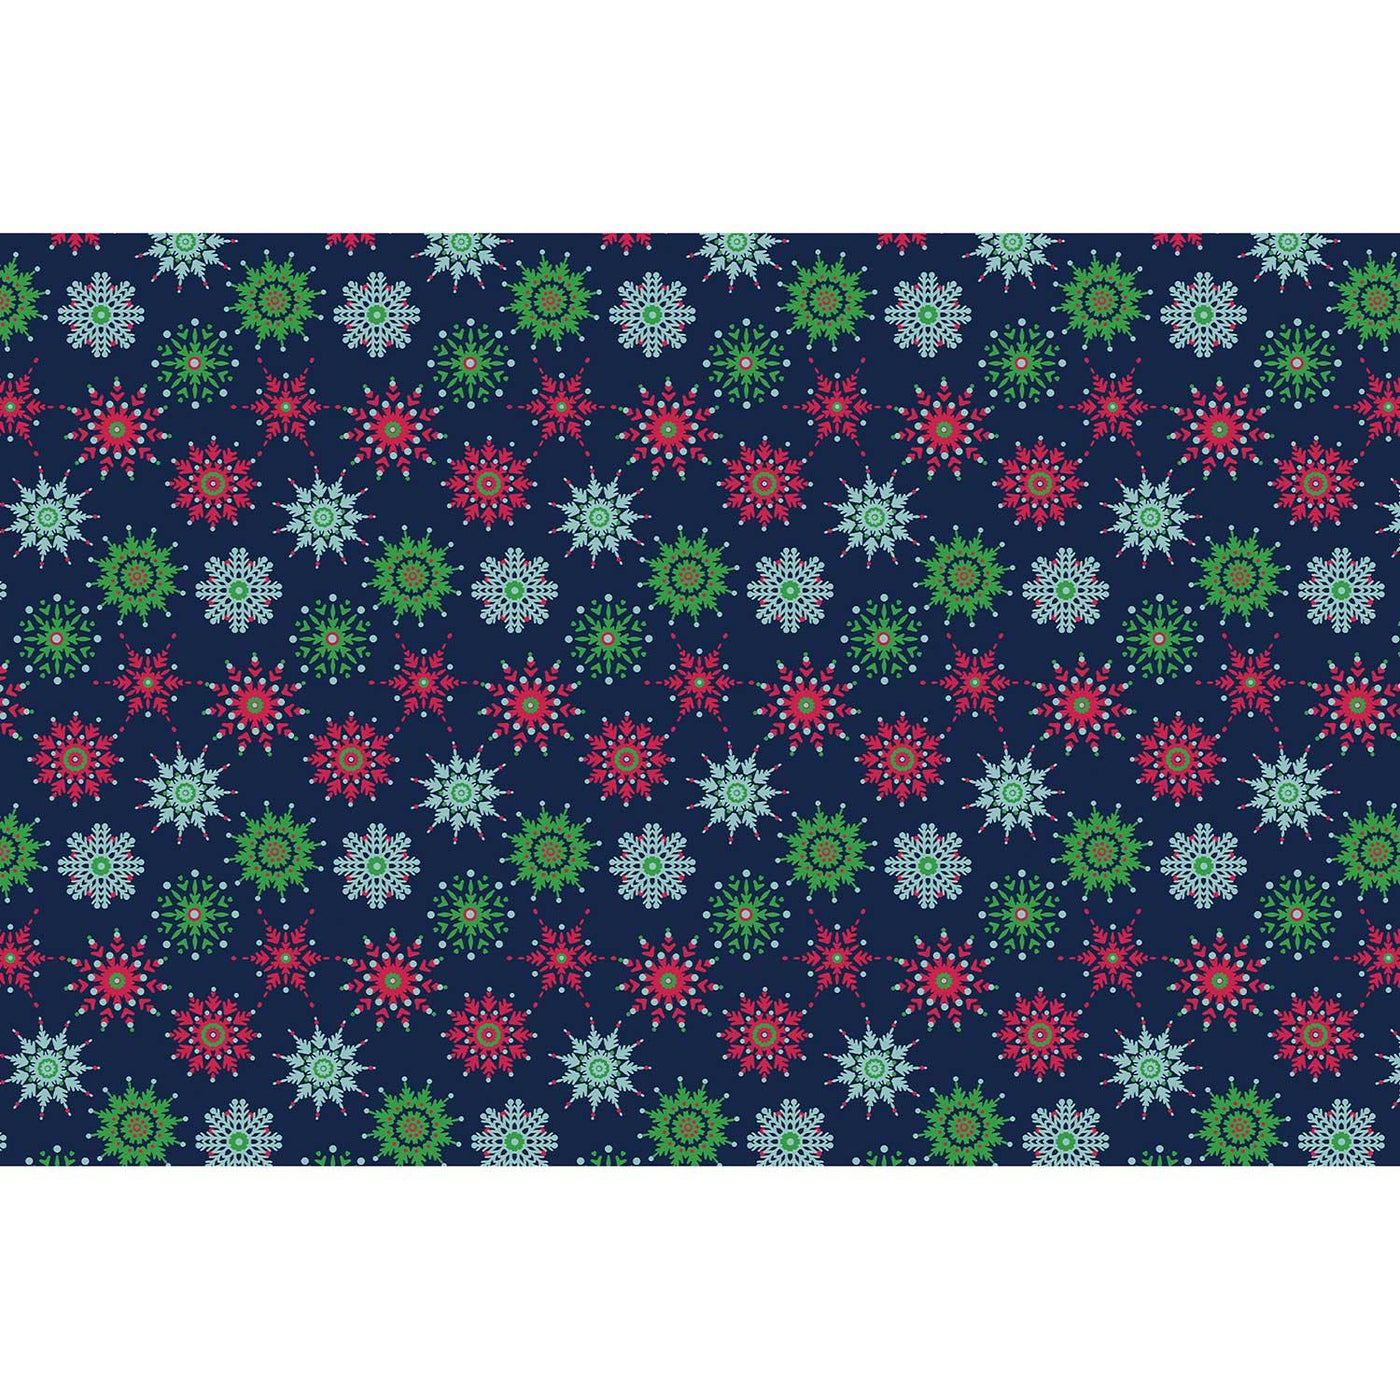 Midnight Snowflakes 20" x 30" Christmas Gift Tissue Paper by Present Paper - Vysn